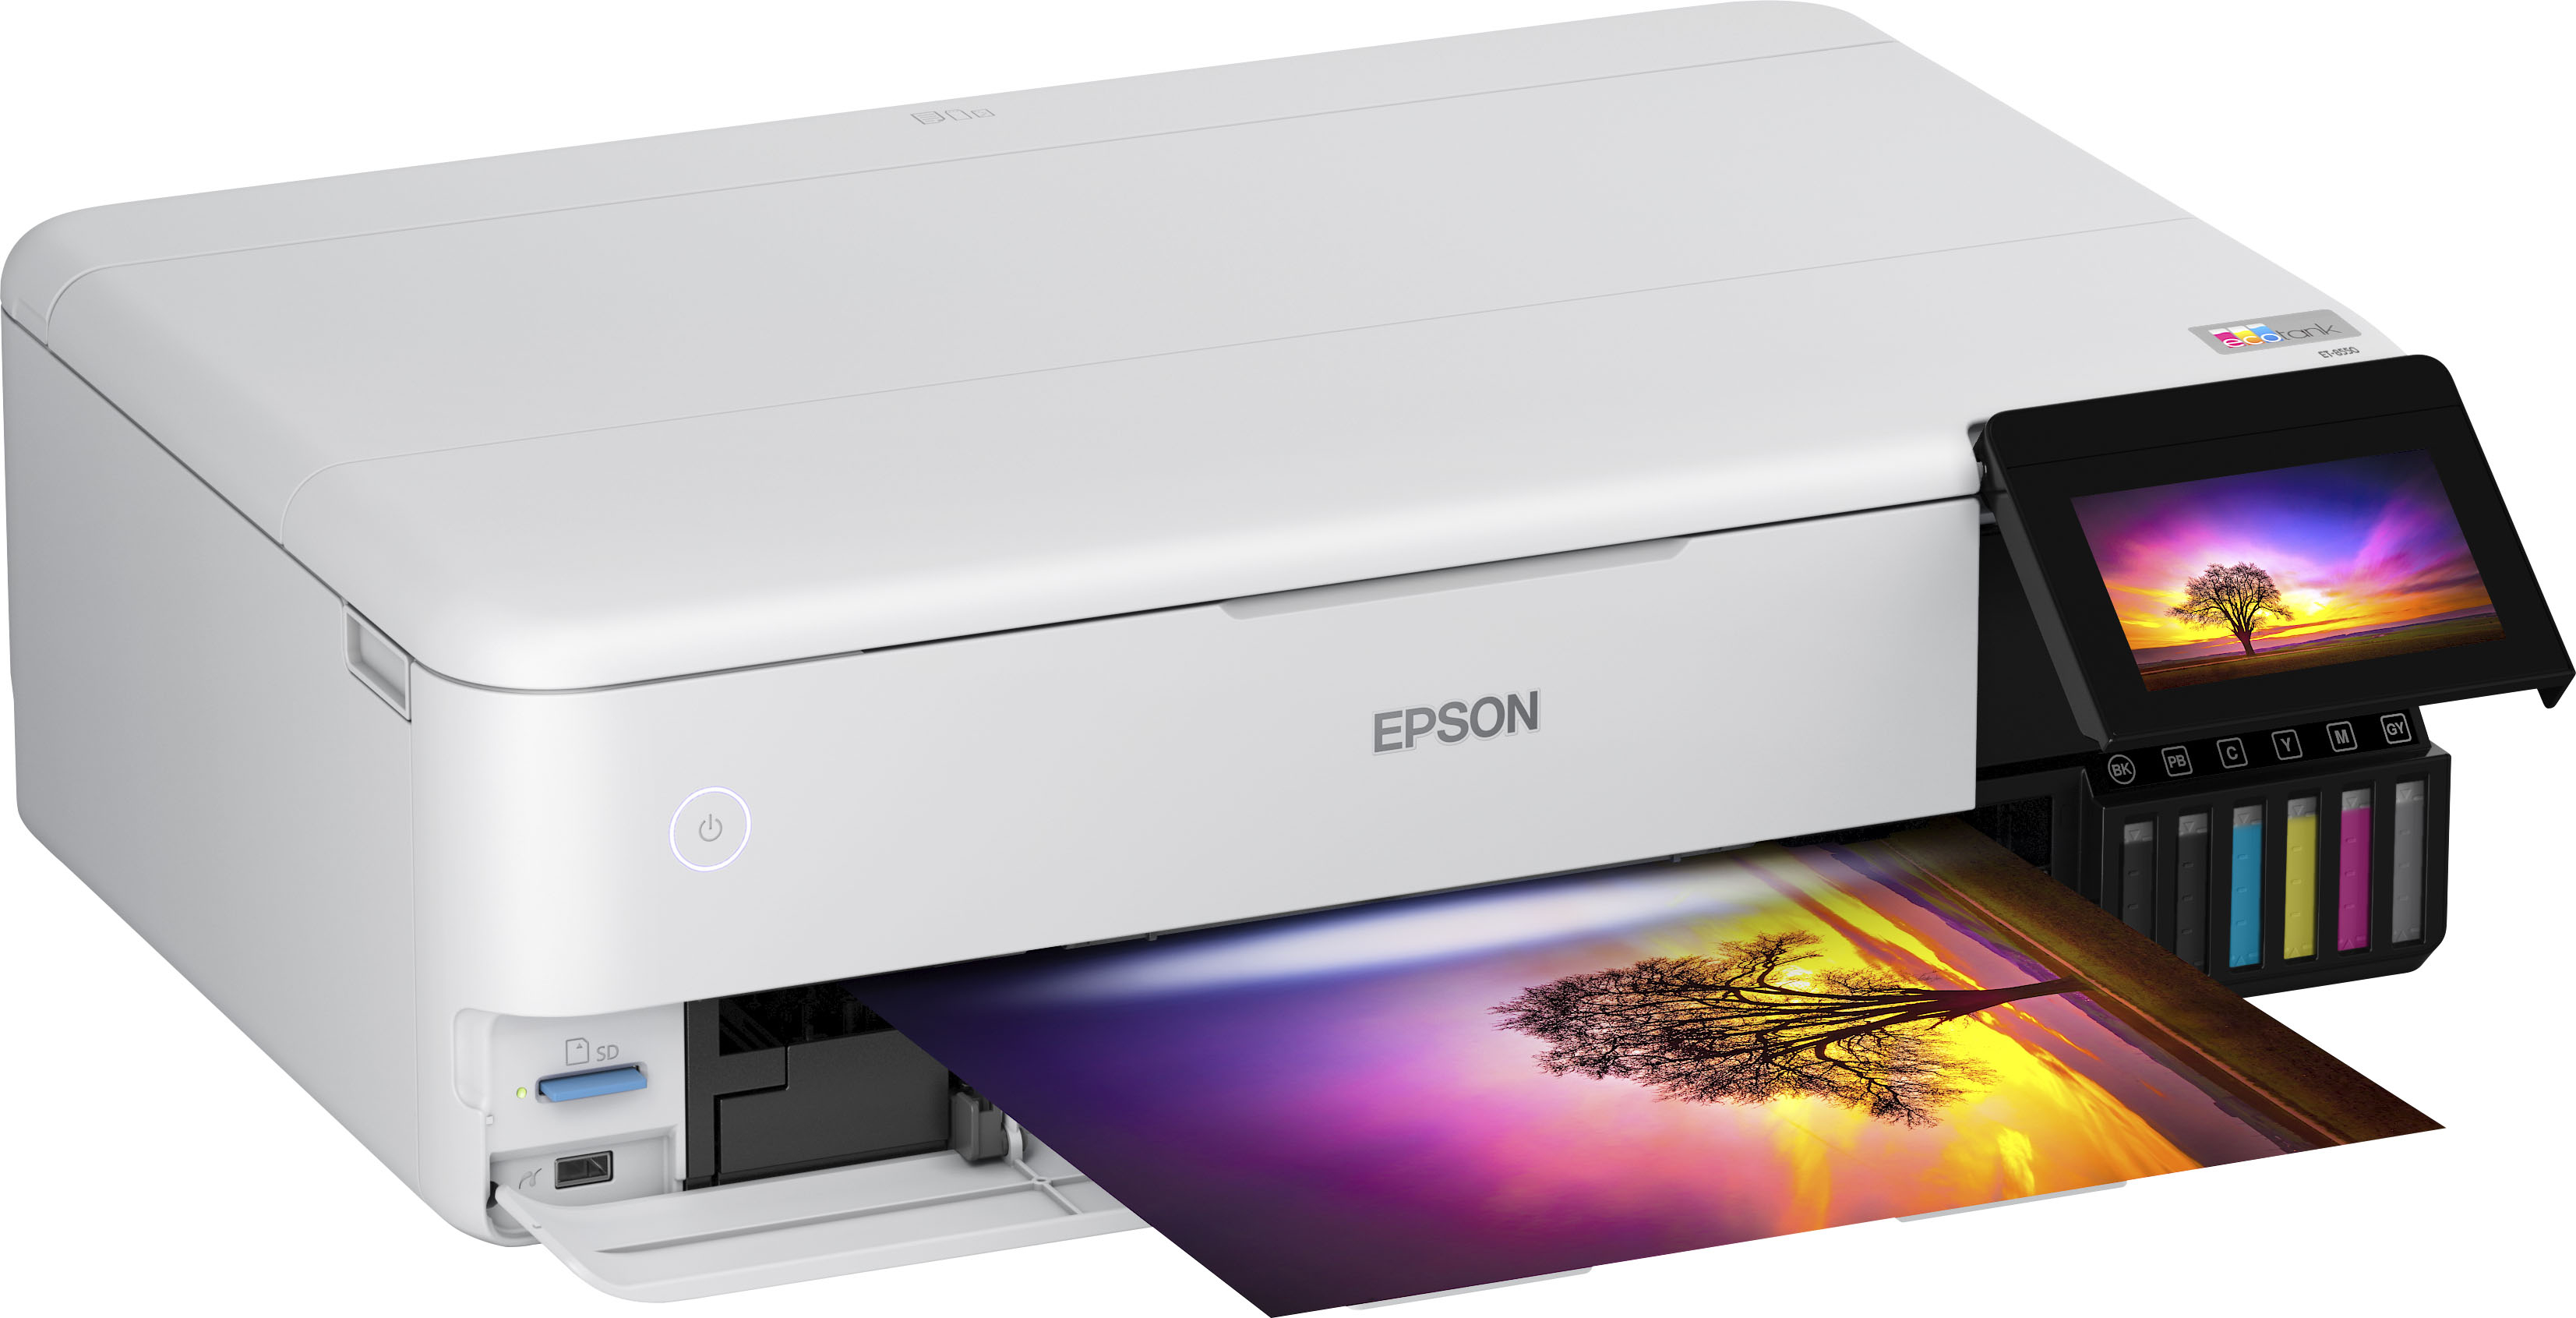 Epson Photo Paper (100+ products) compare price now »